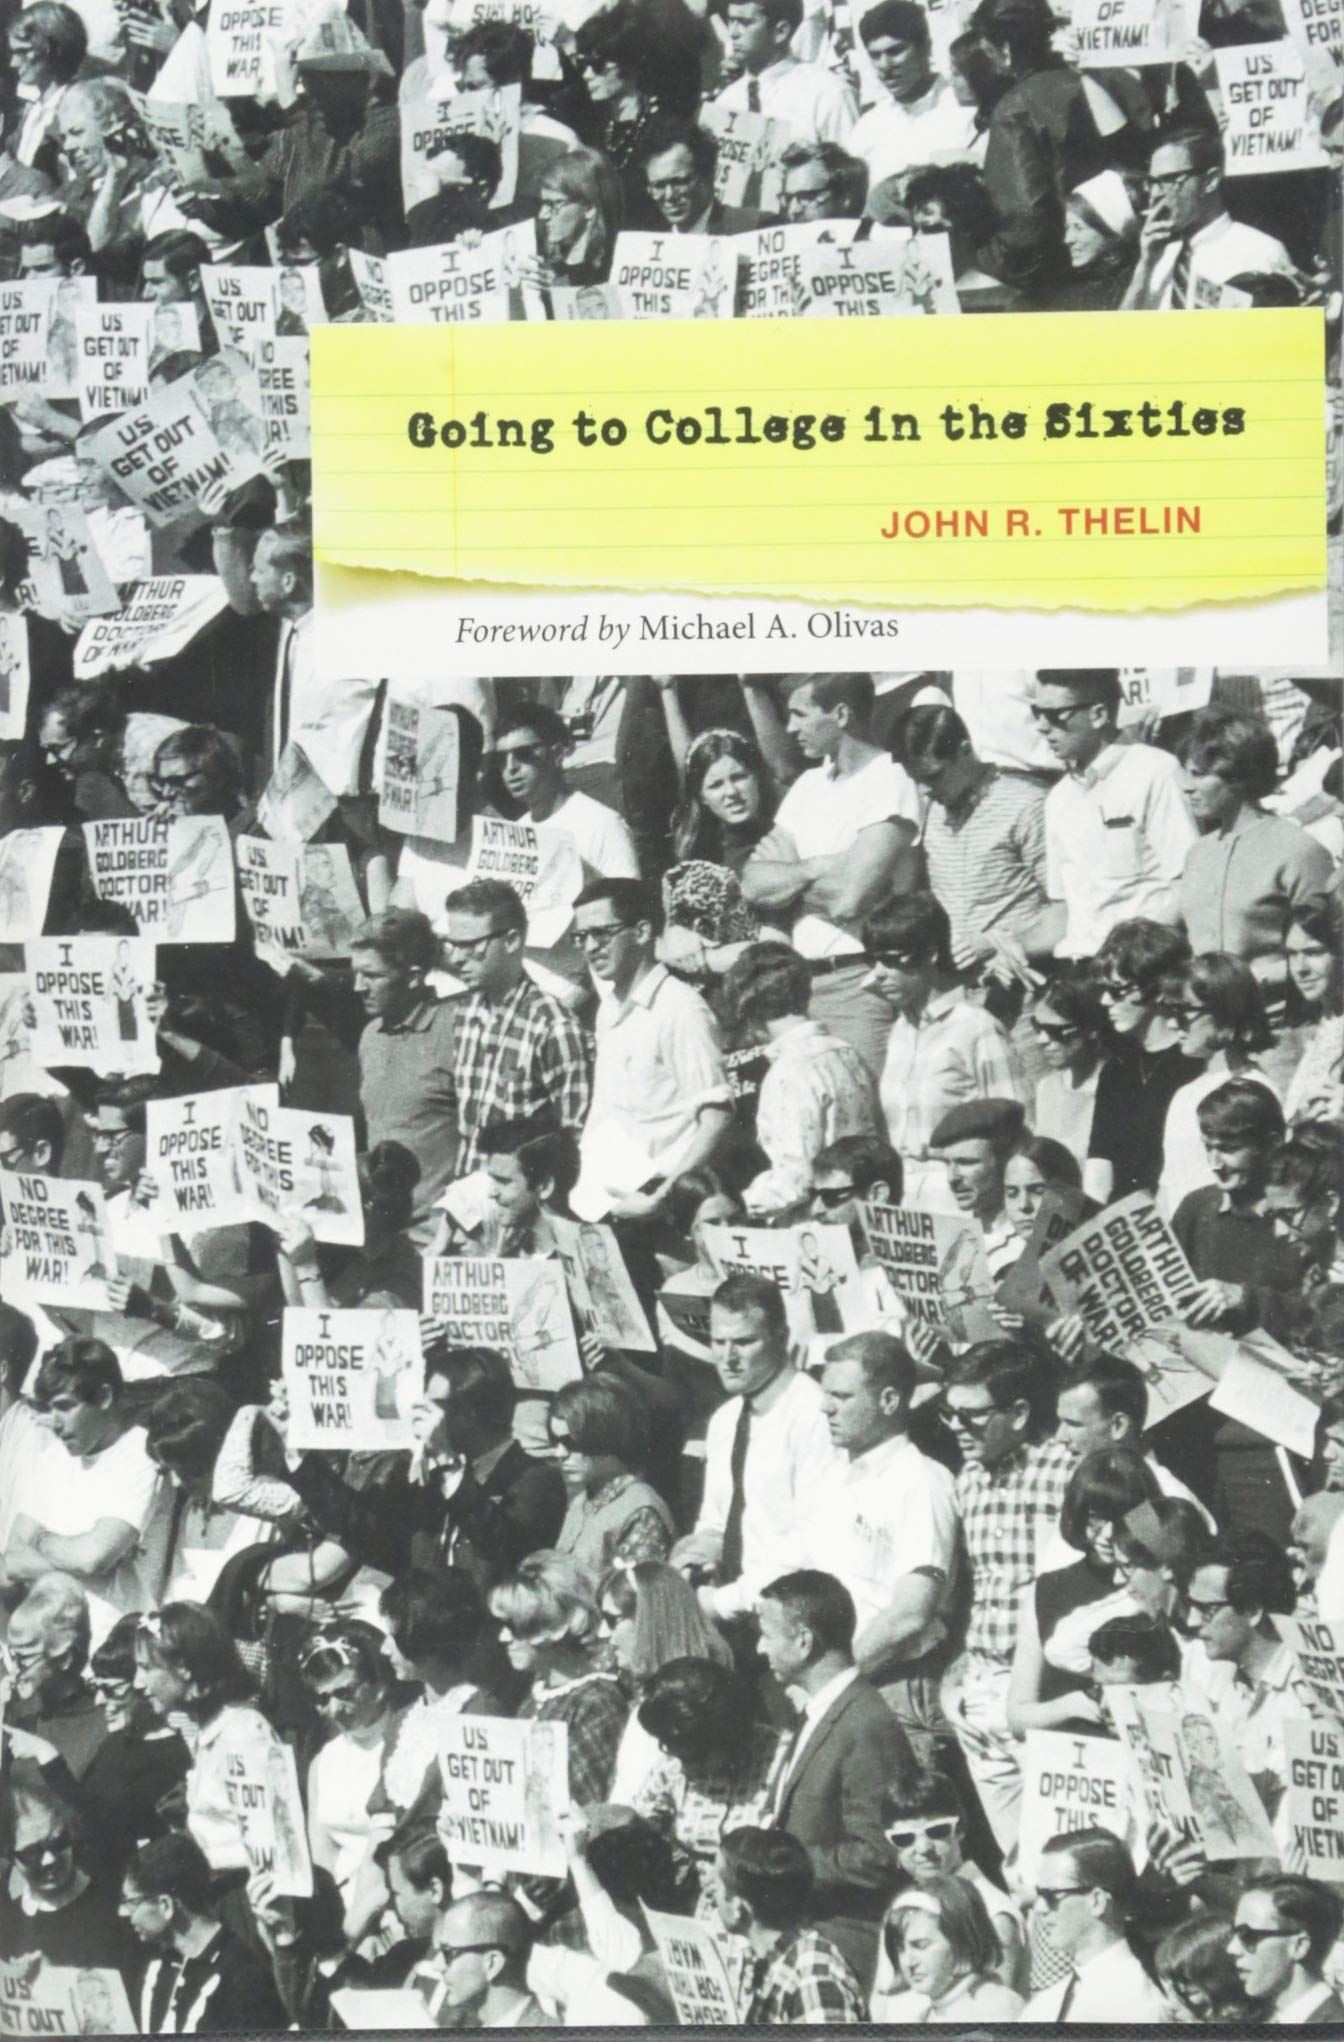 Beyond the Counterculture: Rethinking College in the ’60s